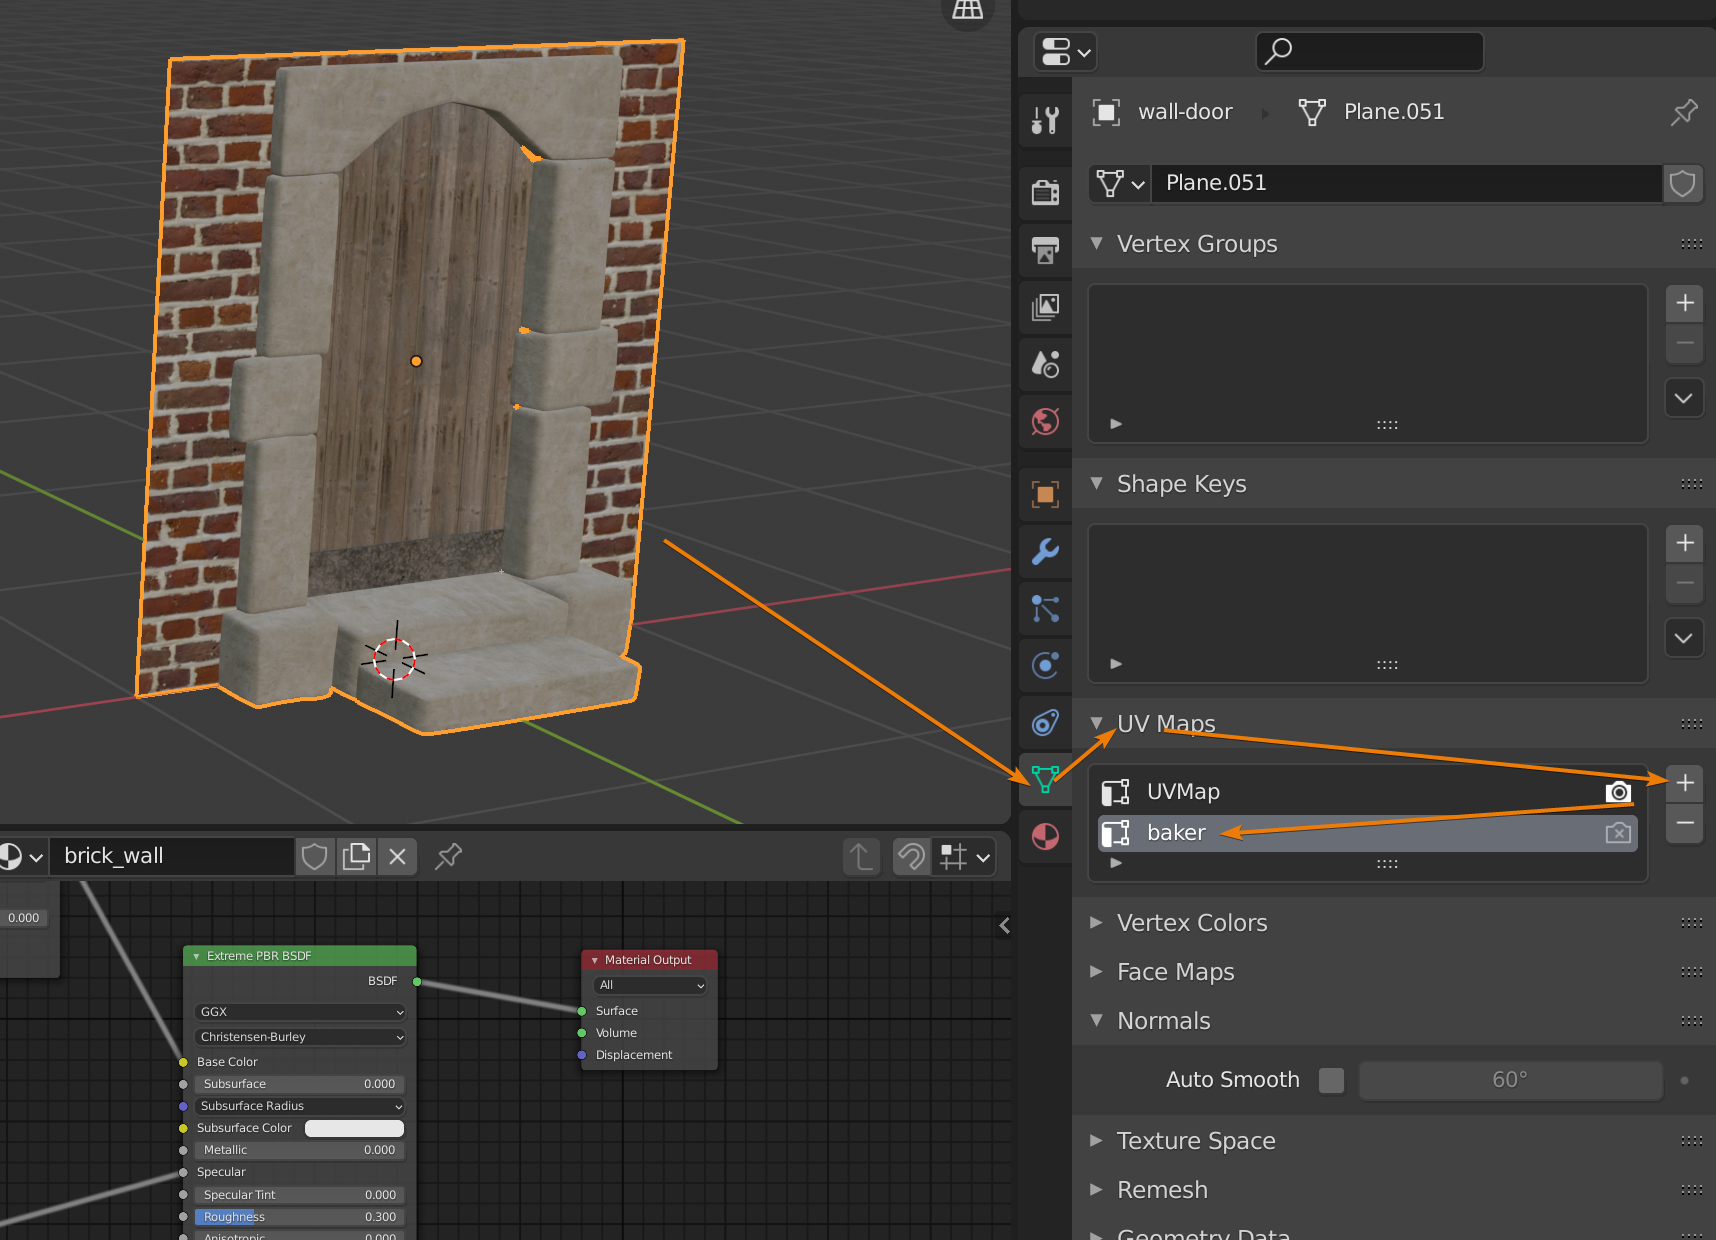 How to bake textures in Blender